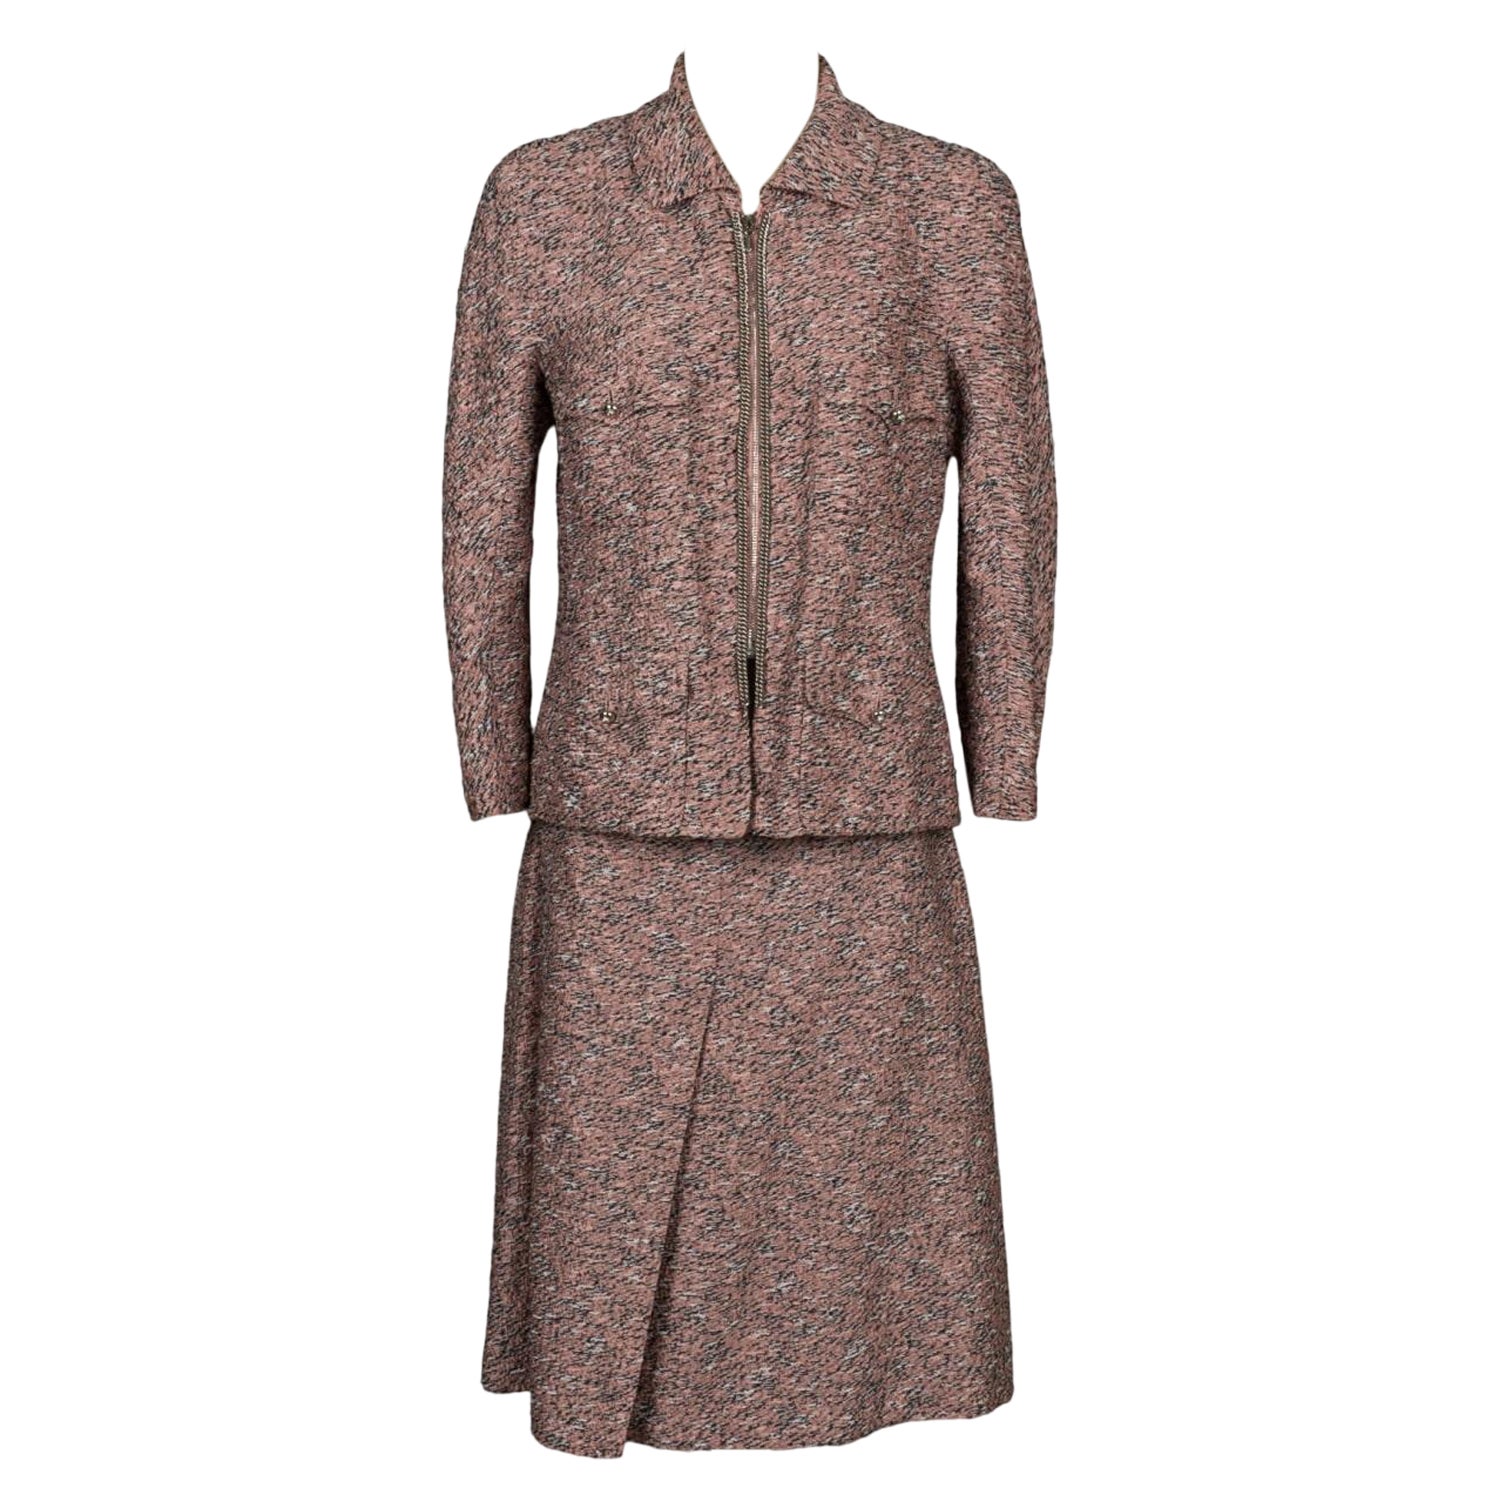 Chanel Tweed Jacket and Skirt Suit Set For Sale